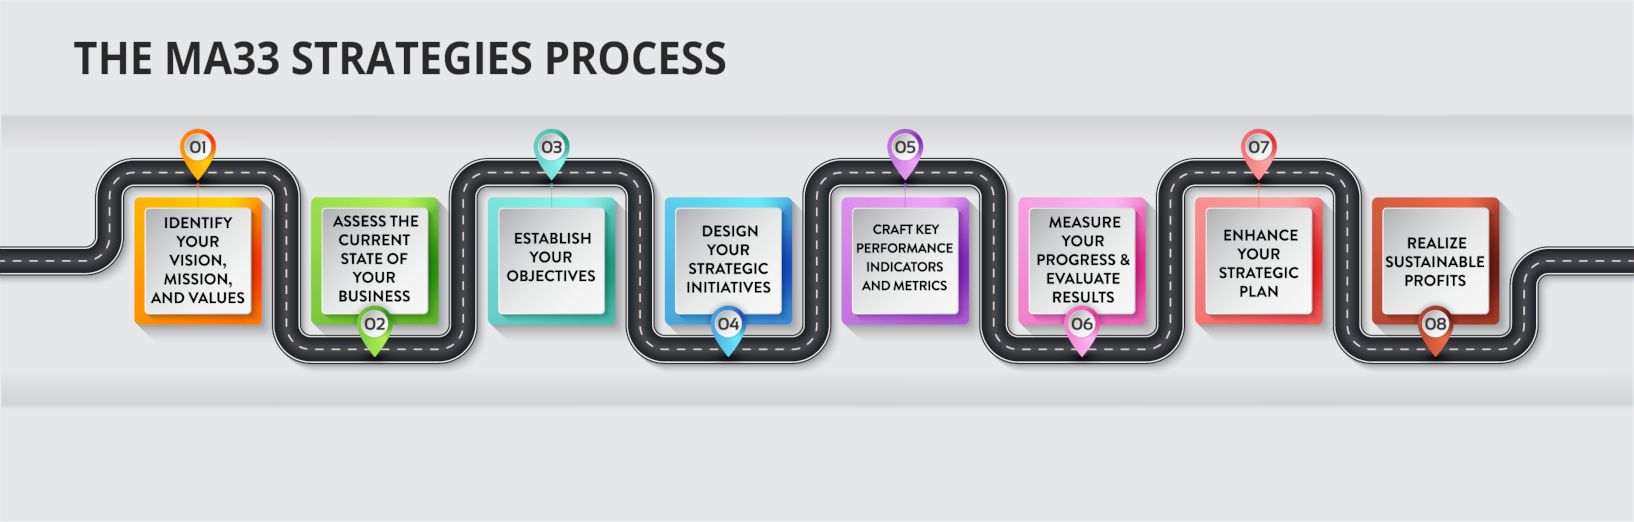 The MA33 Strategies Process Diagram in Color